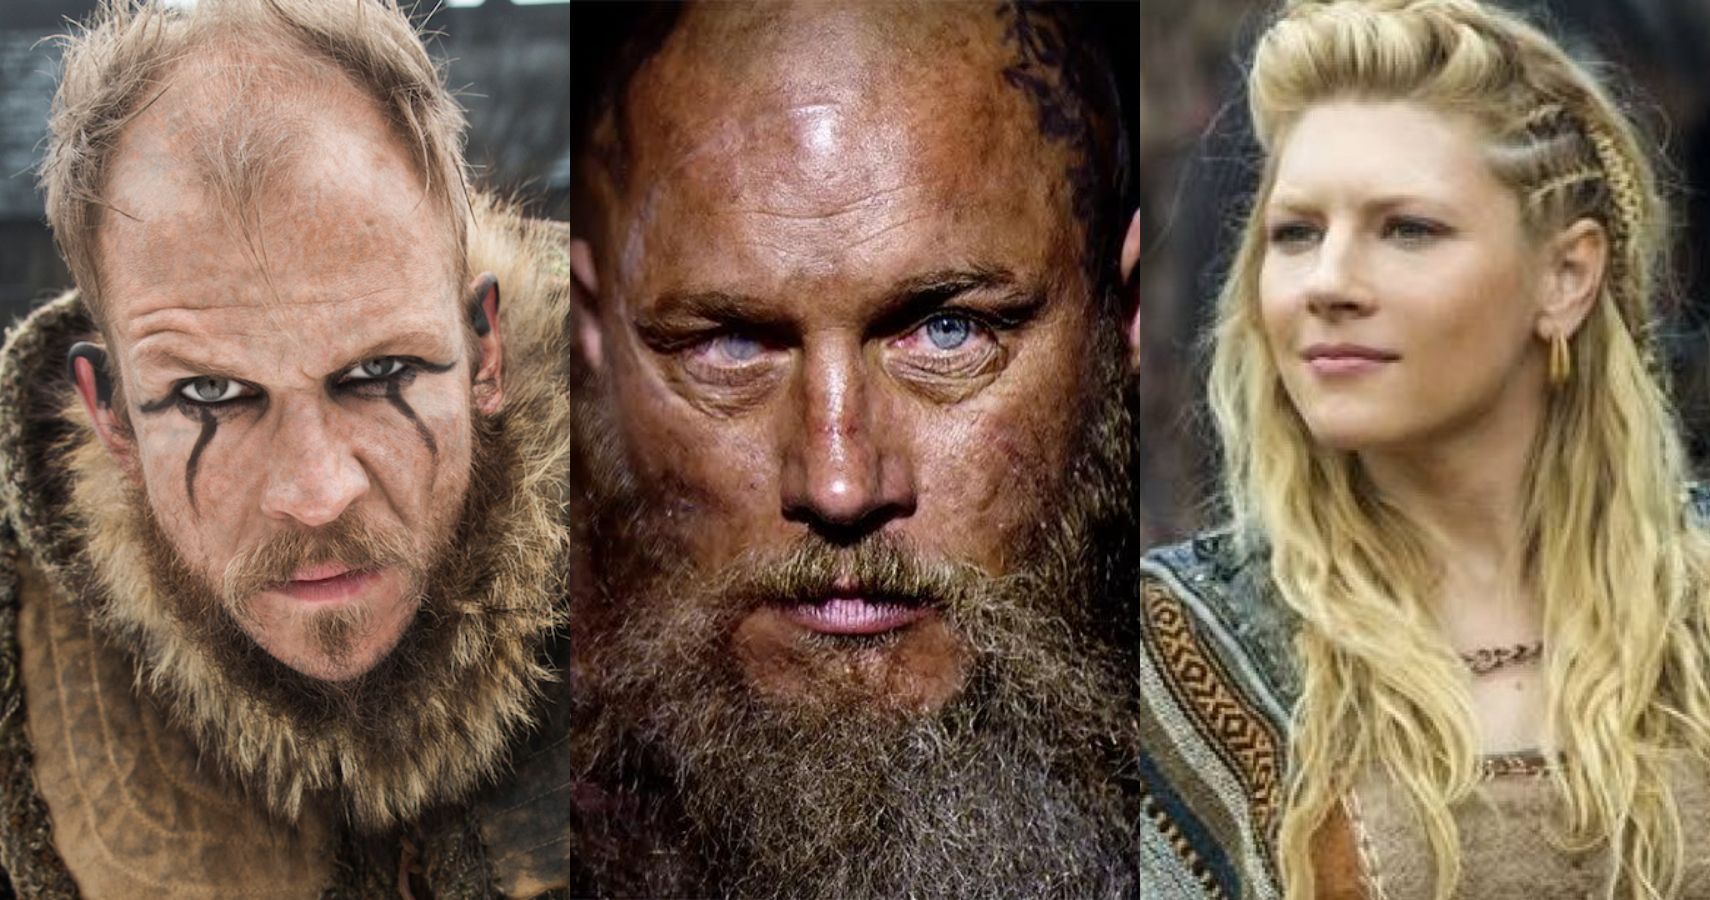 The Real Reason This Major Character Is Missing From Vikings